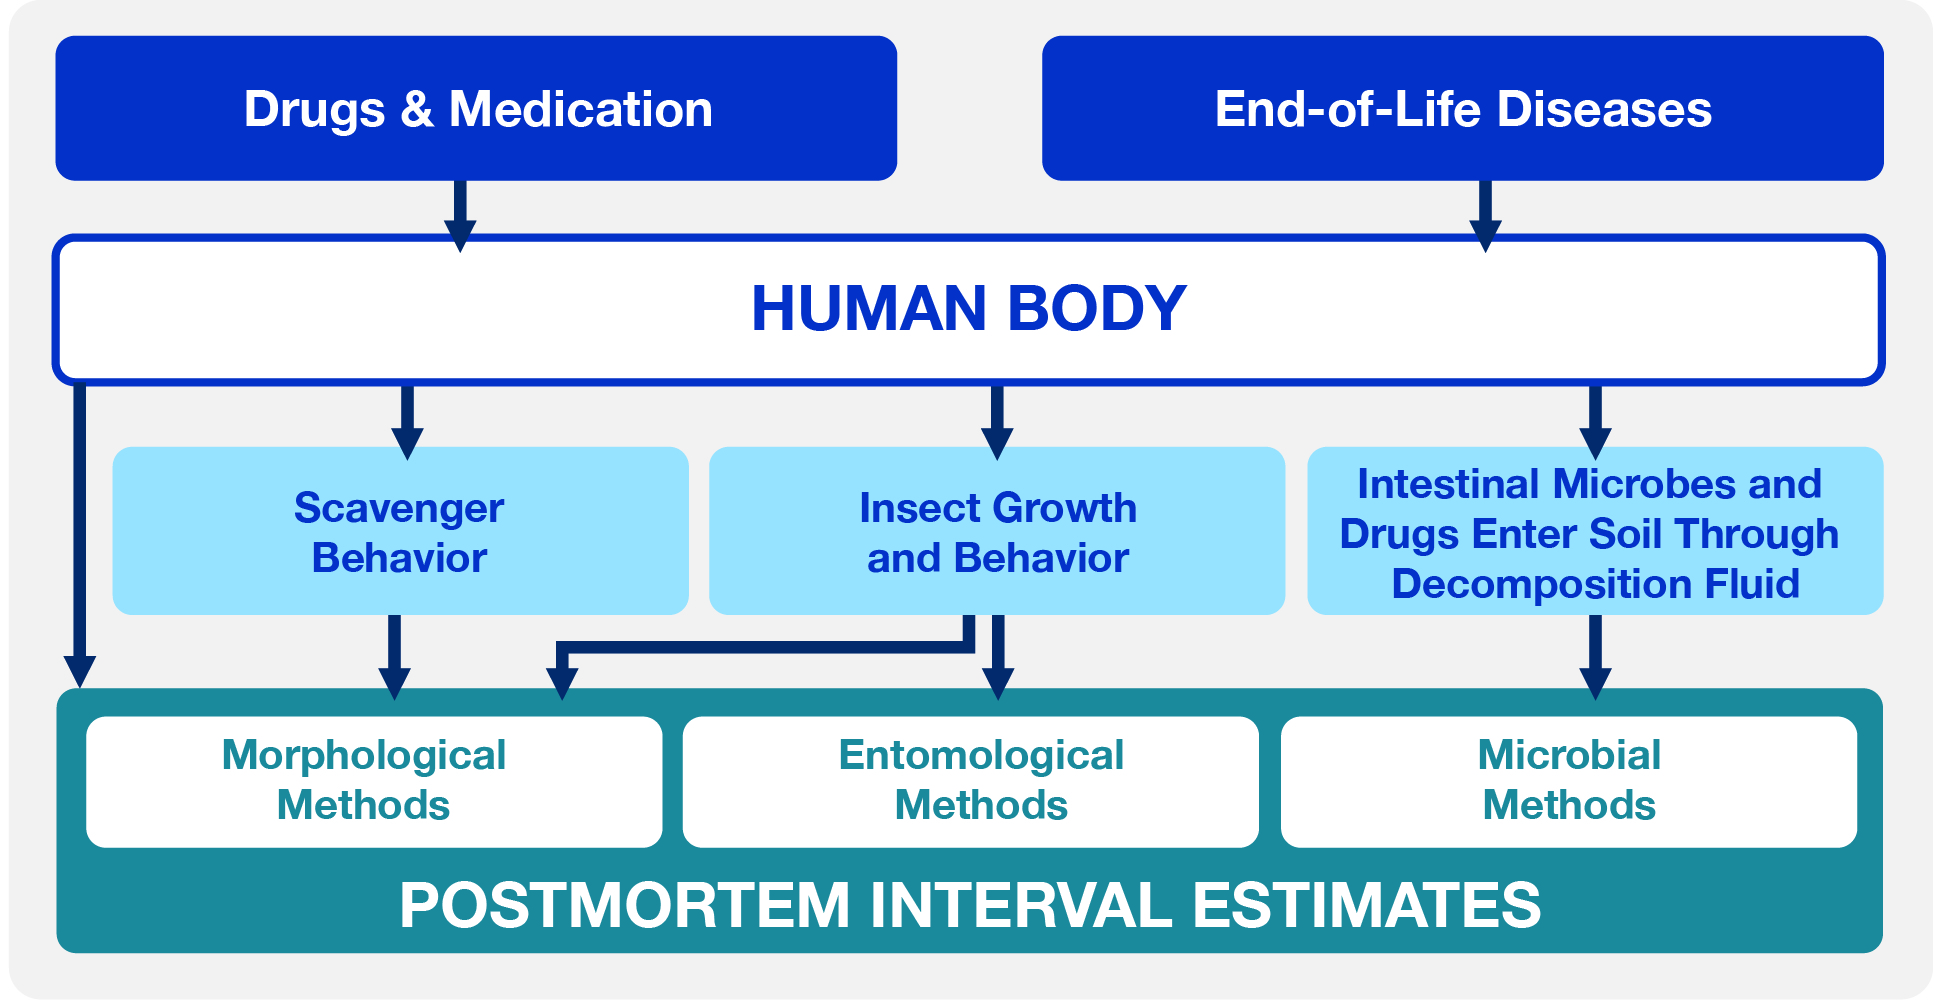 Variables that may affect decomposition and postmortem interval estimates, including drugs of abuse, medication, end-of-life diseases, scavenger behavior, insect behavior, and intestinal microbes.